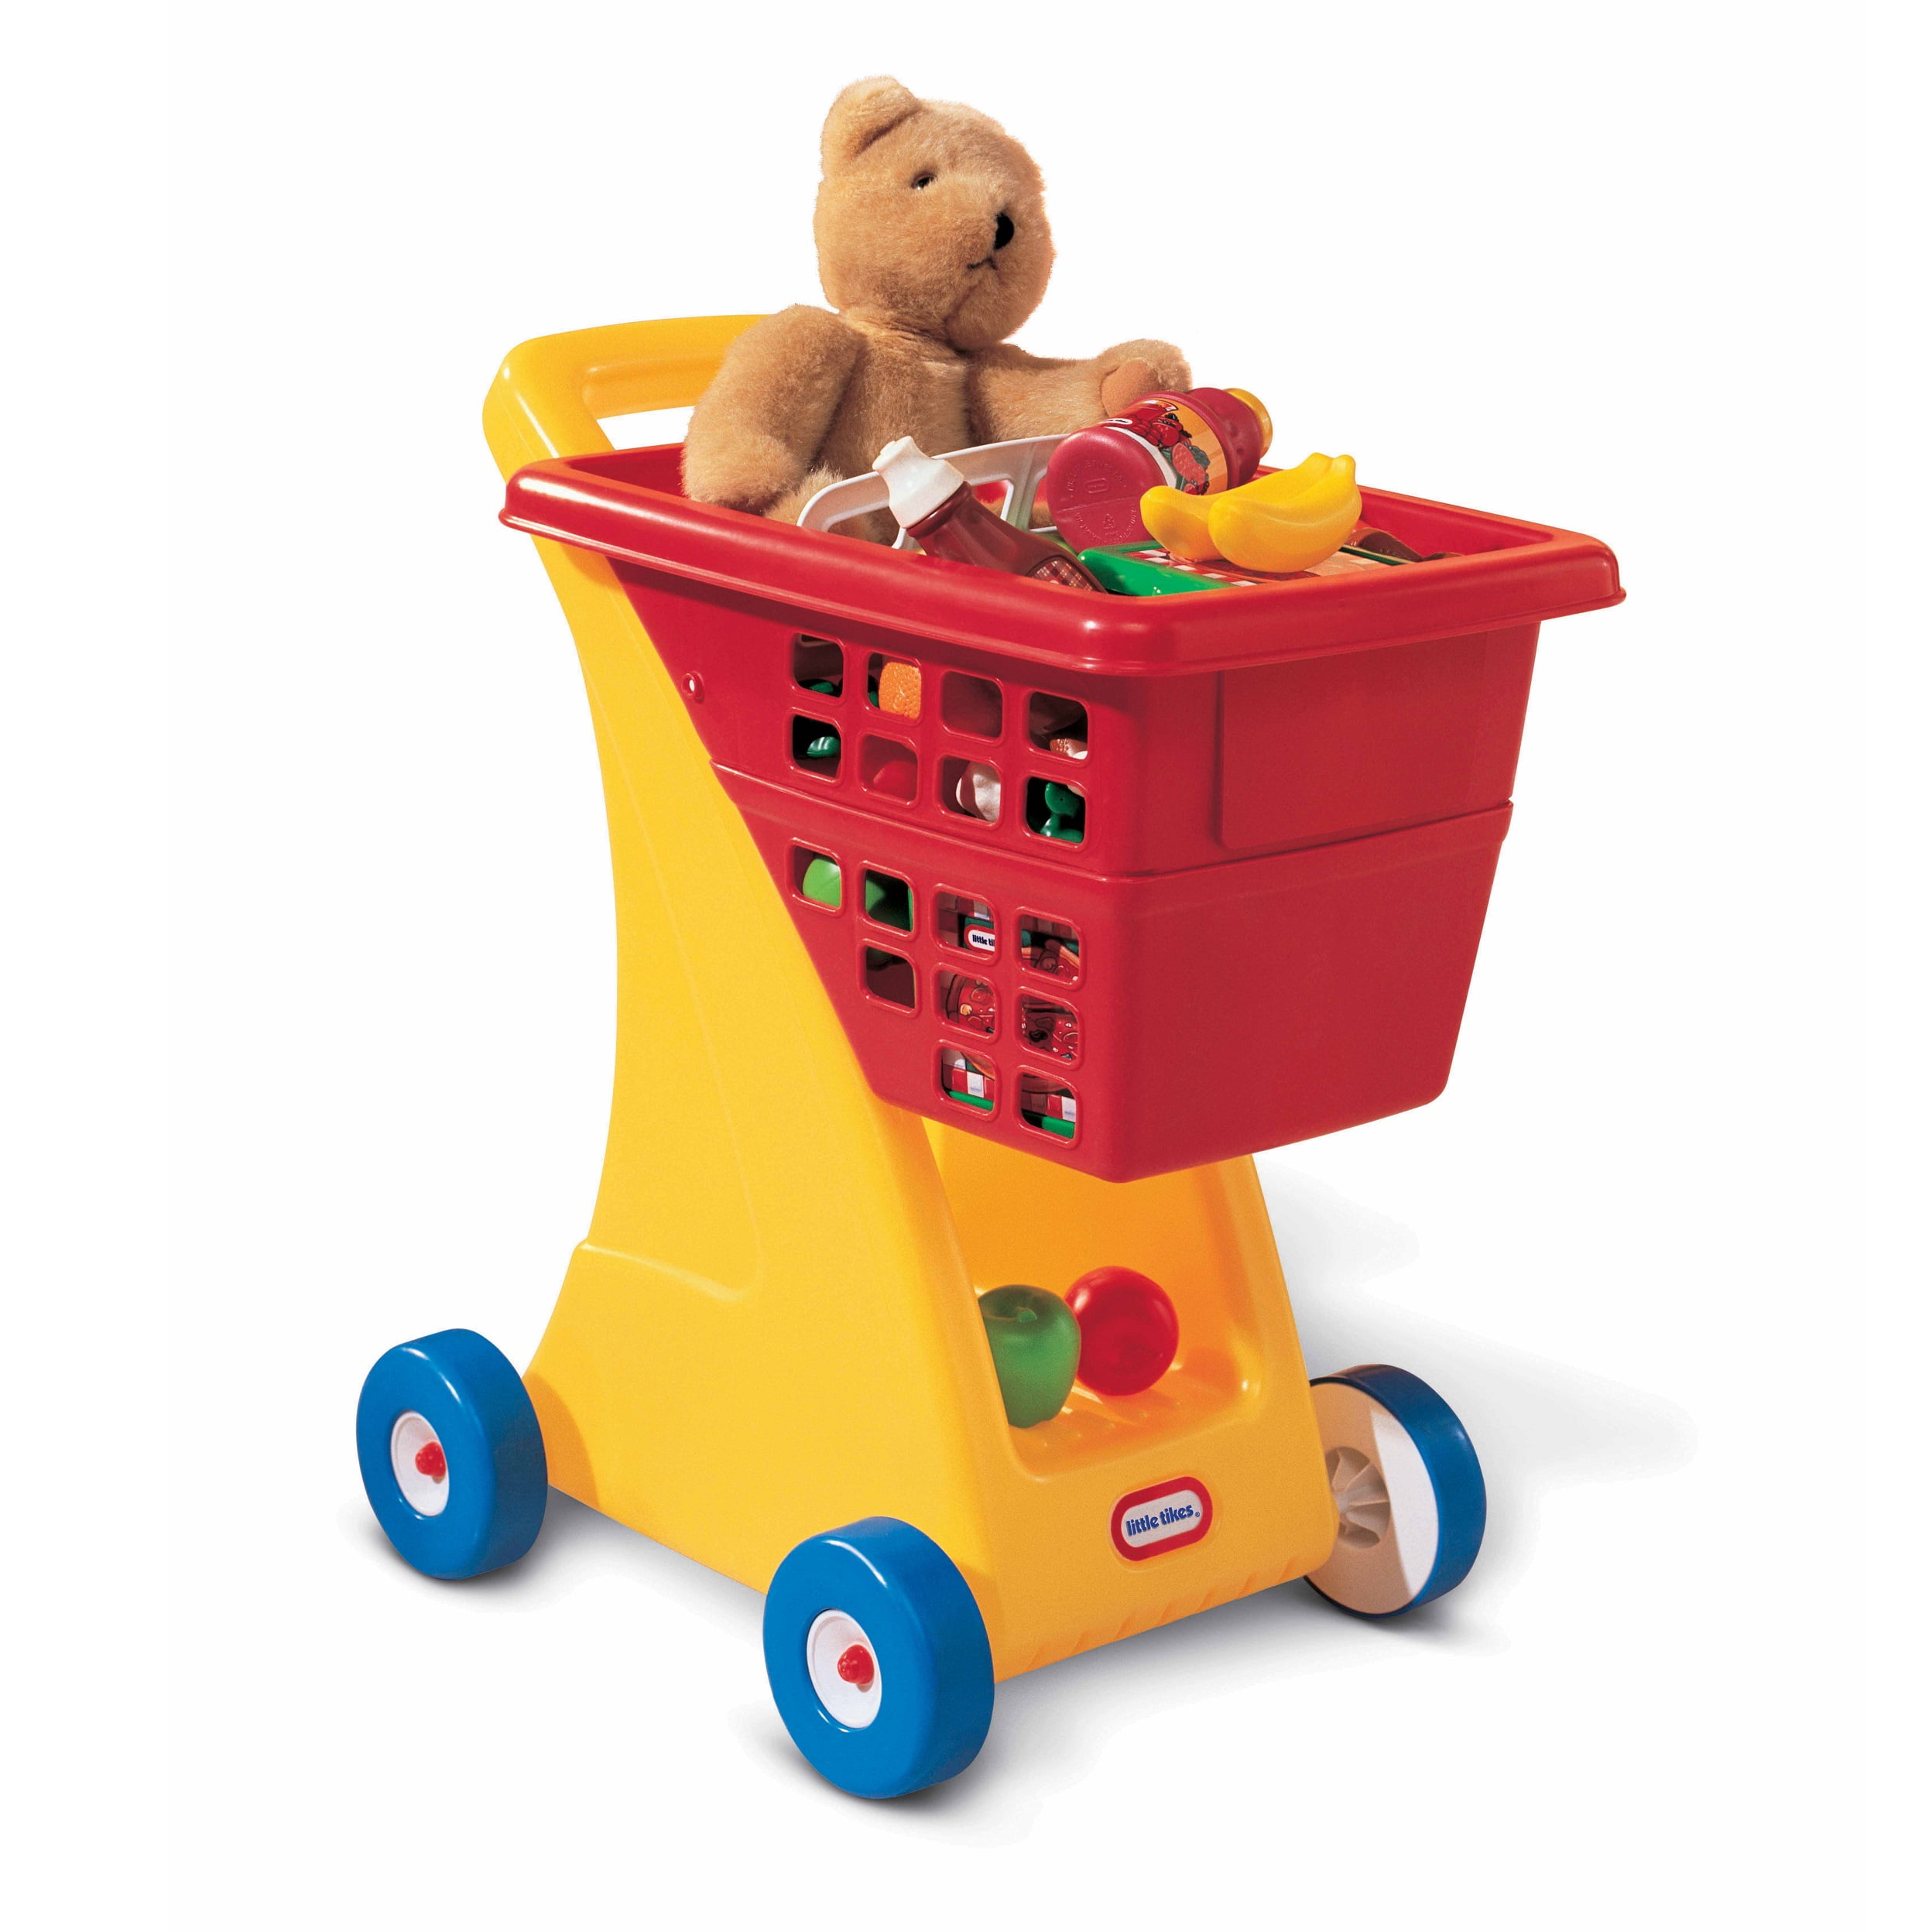 Little Tikes Toy Shopping Cart with Folding Seat, Multicolor, For Pretend Play  Shopping Grocery Play Store for Kids Toddlers Girls Boys Ages 18+ months. -  Walmart.com